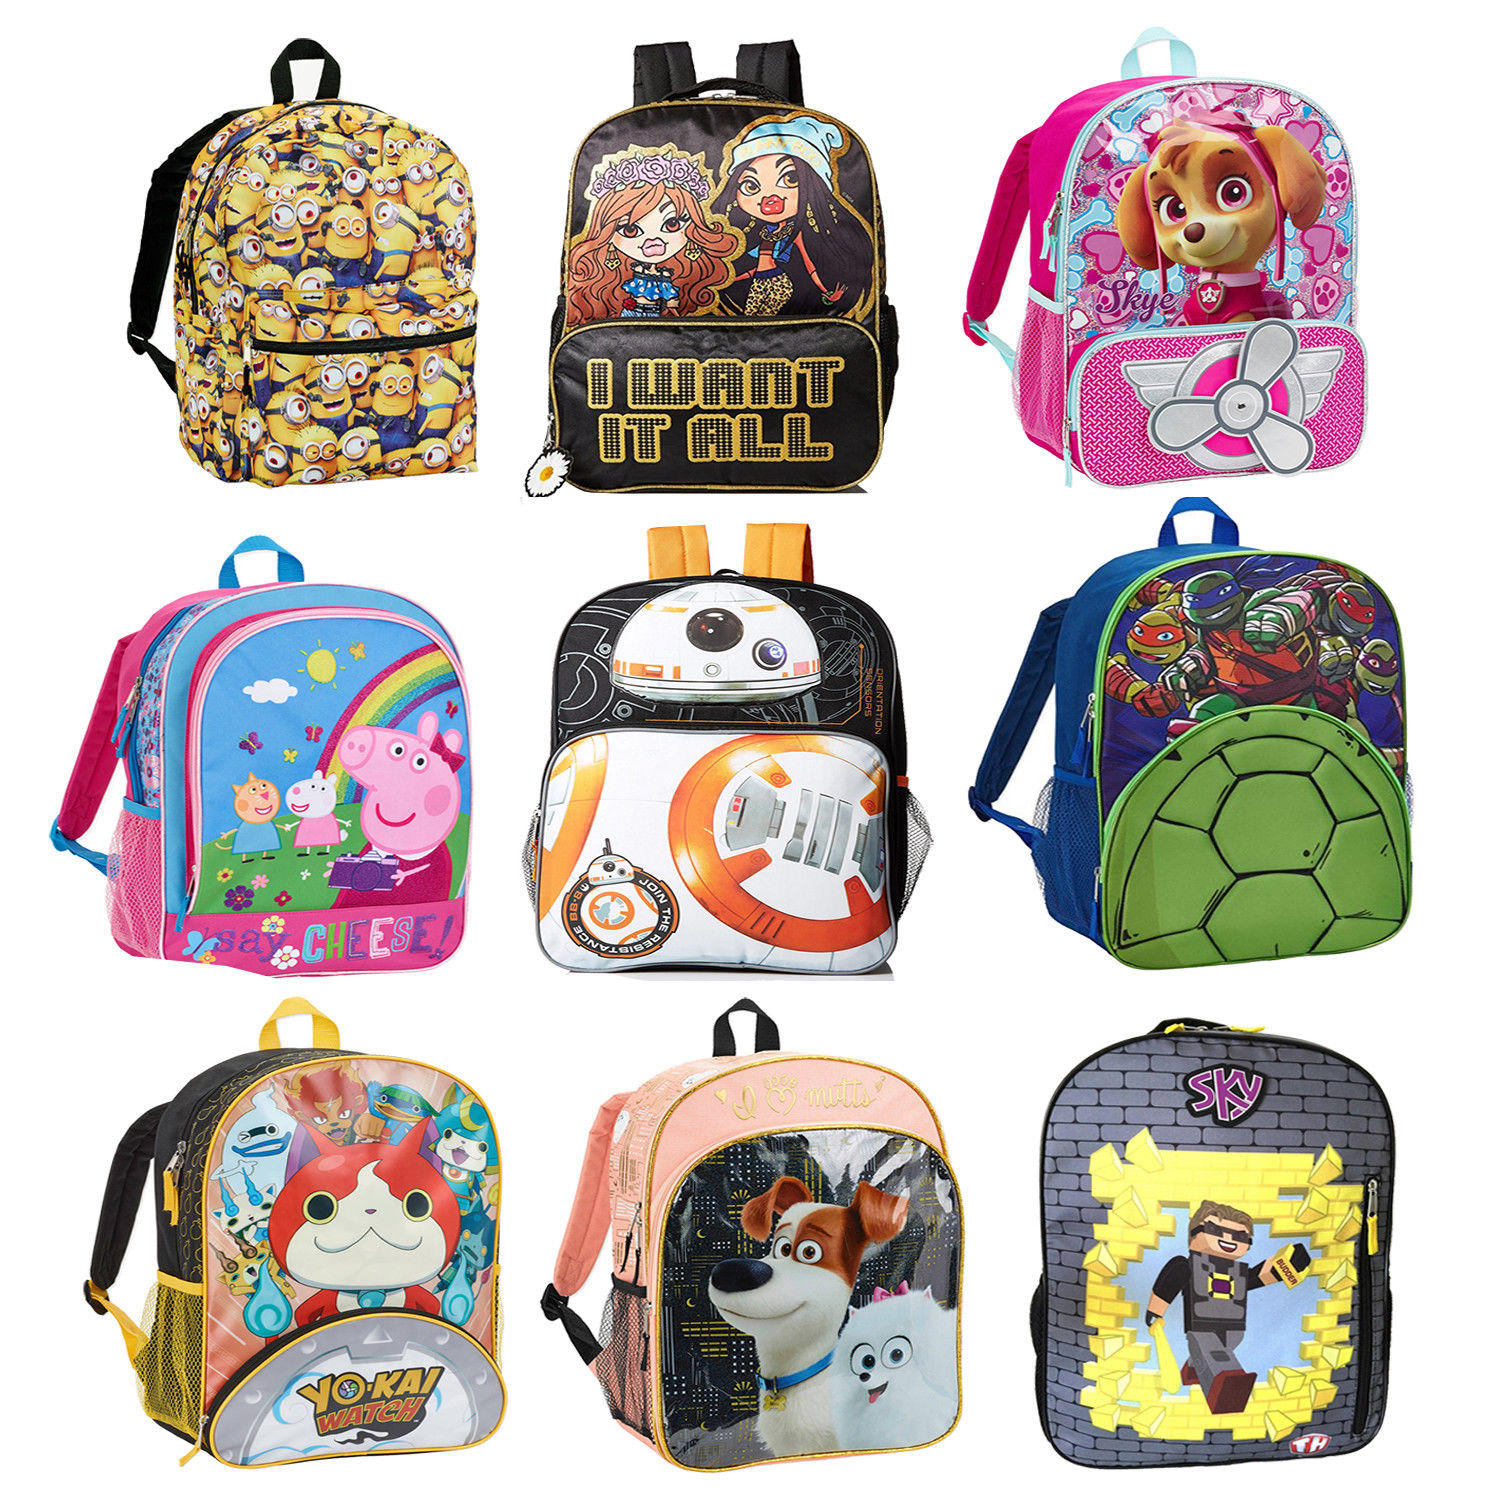 Two 16″ kids backpacks for $7.48 shipped